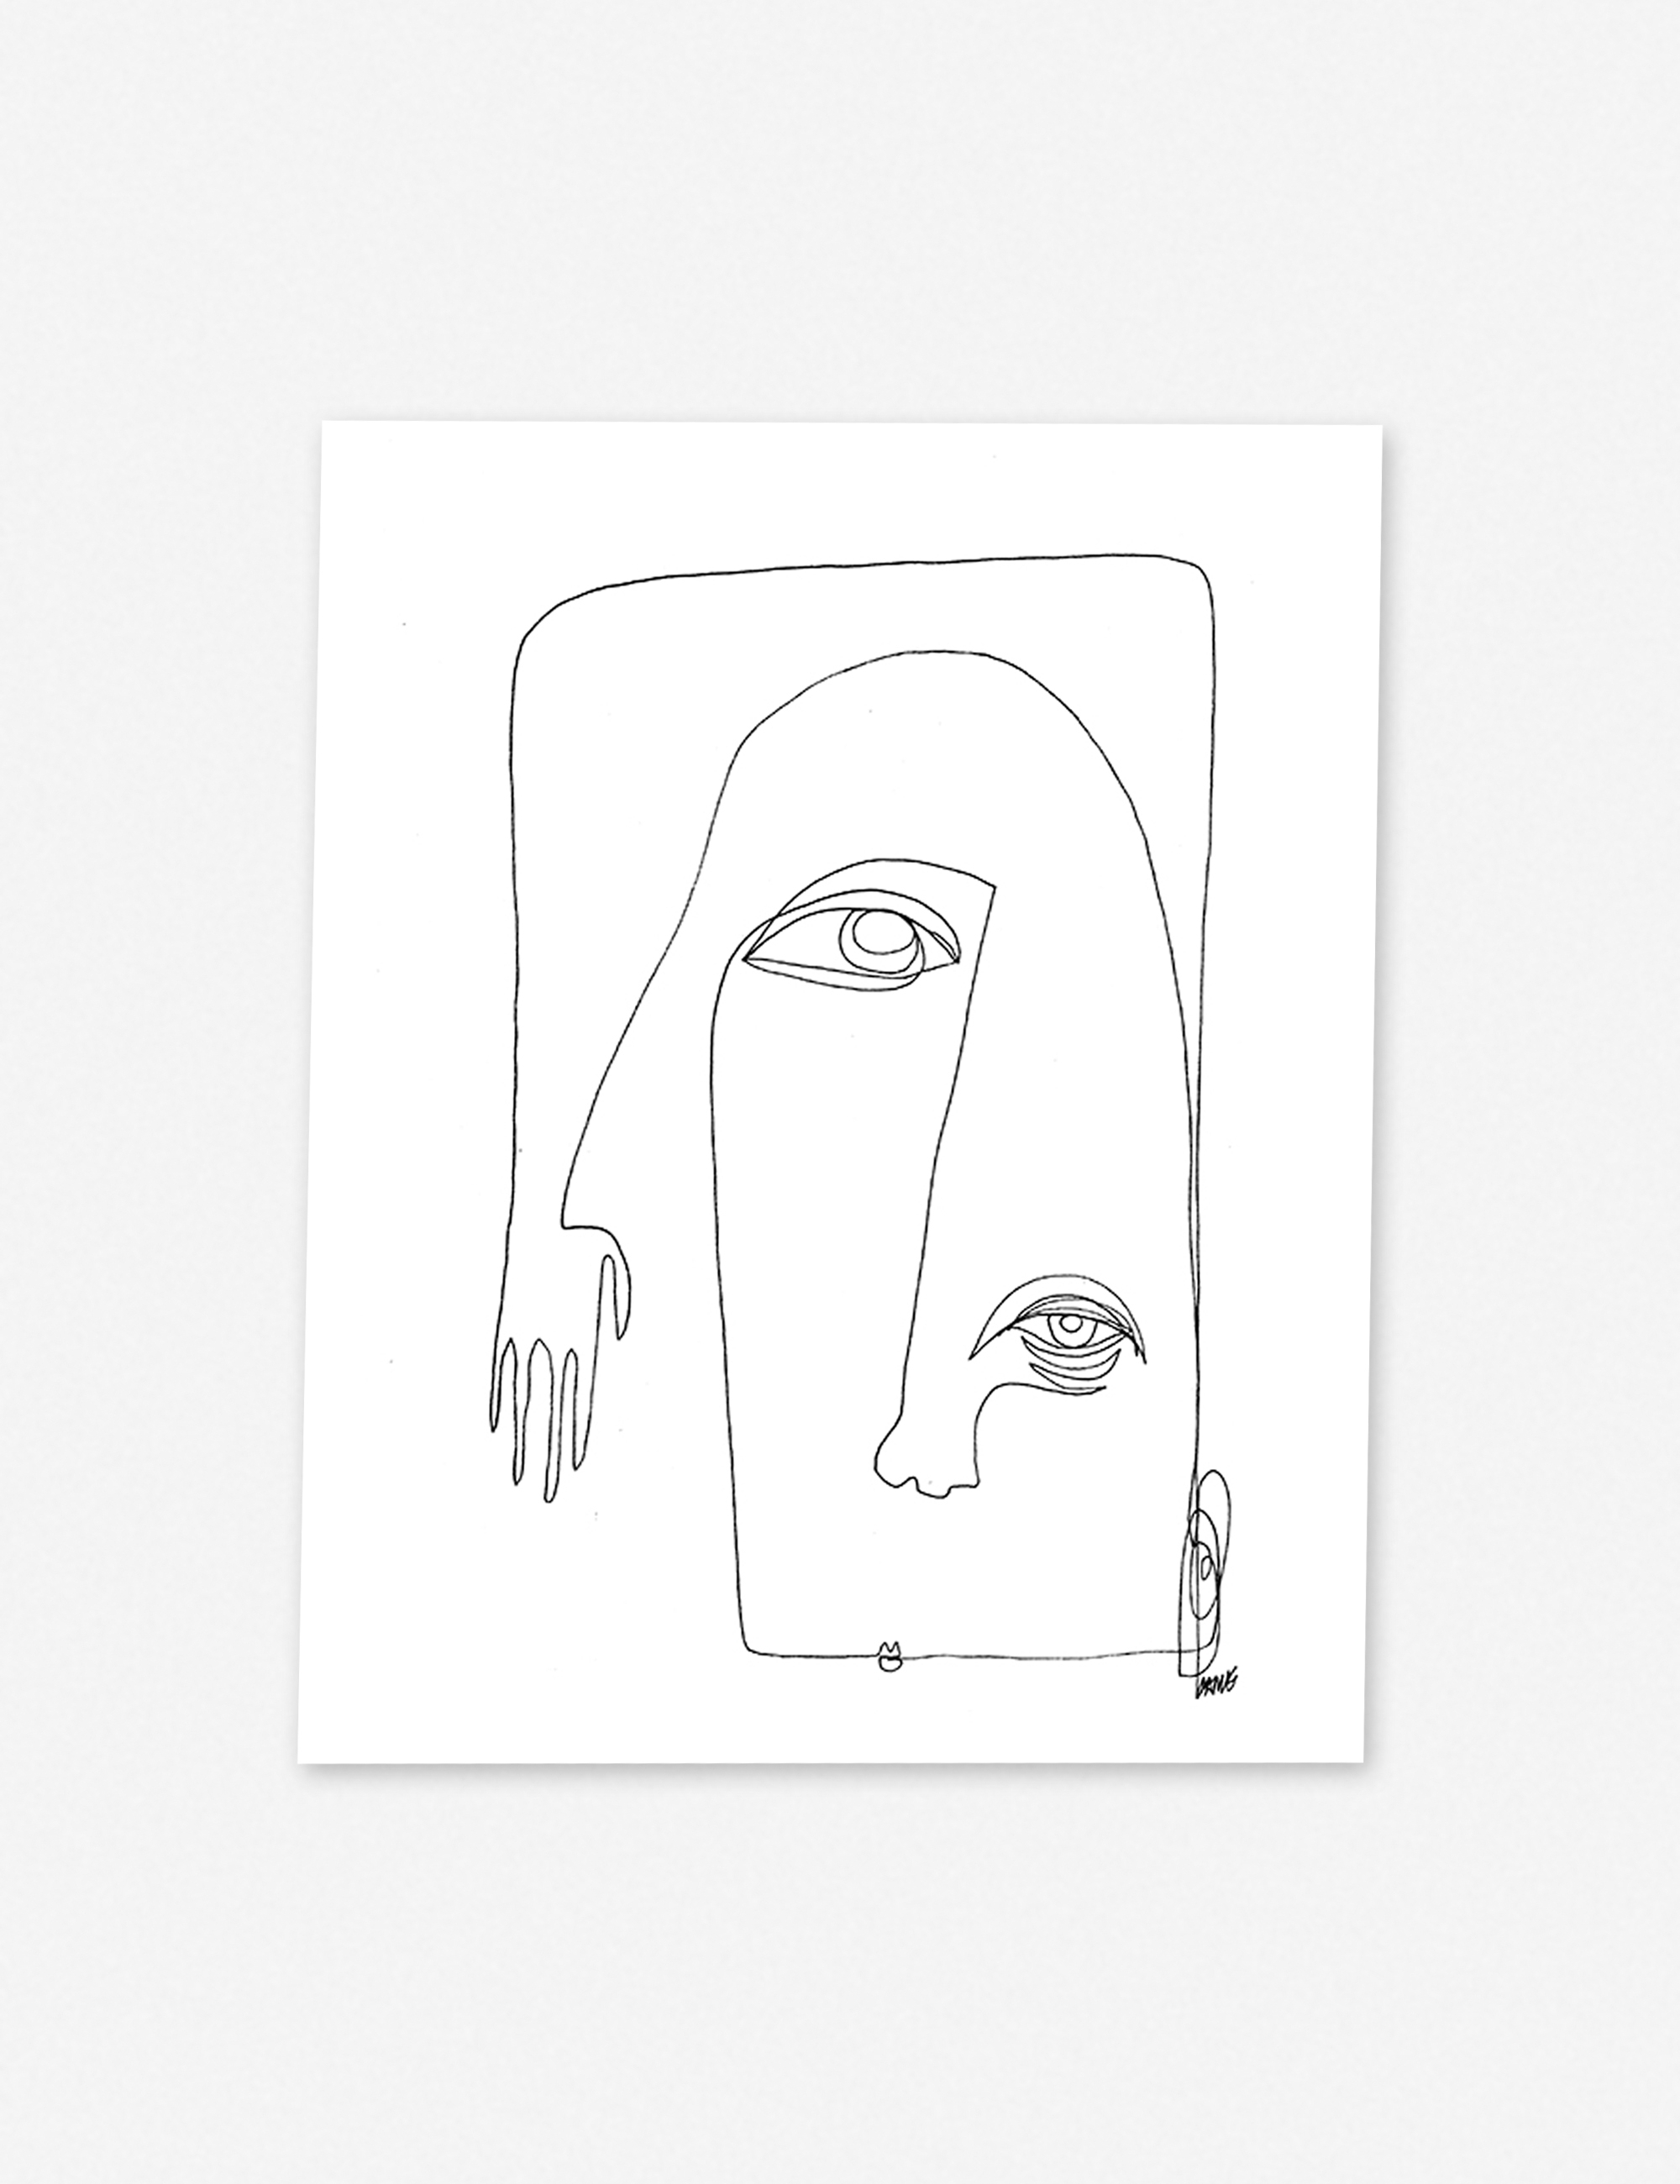 Picasso Print by Damienne Merlina - Image 2